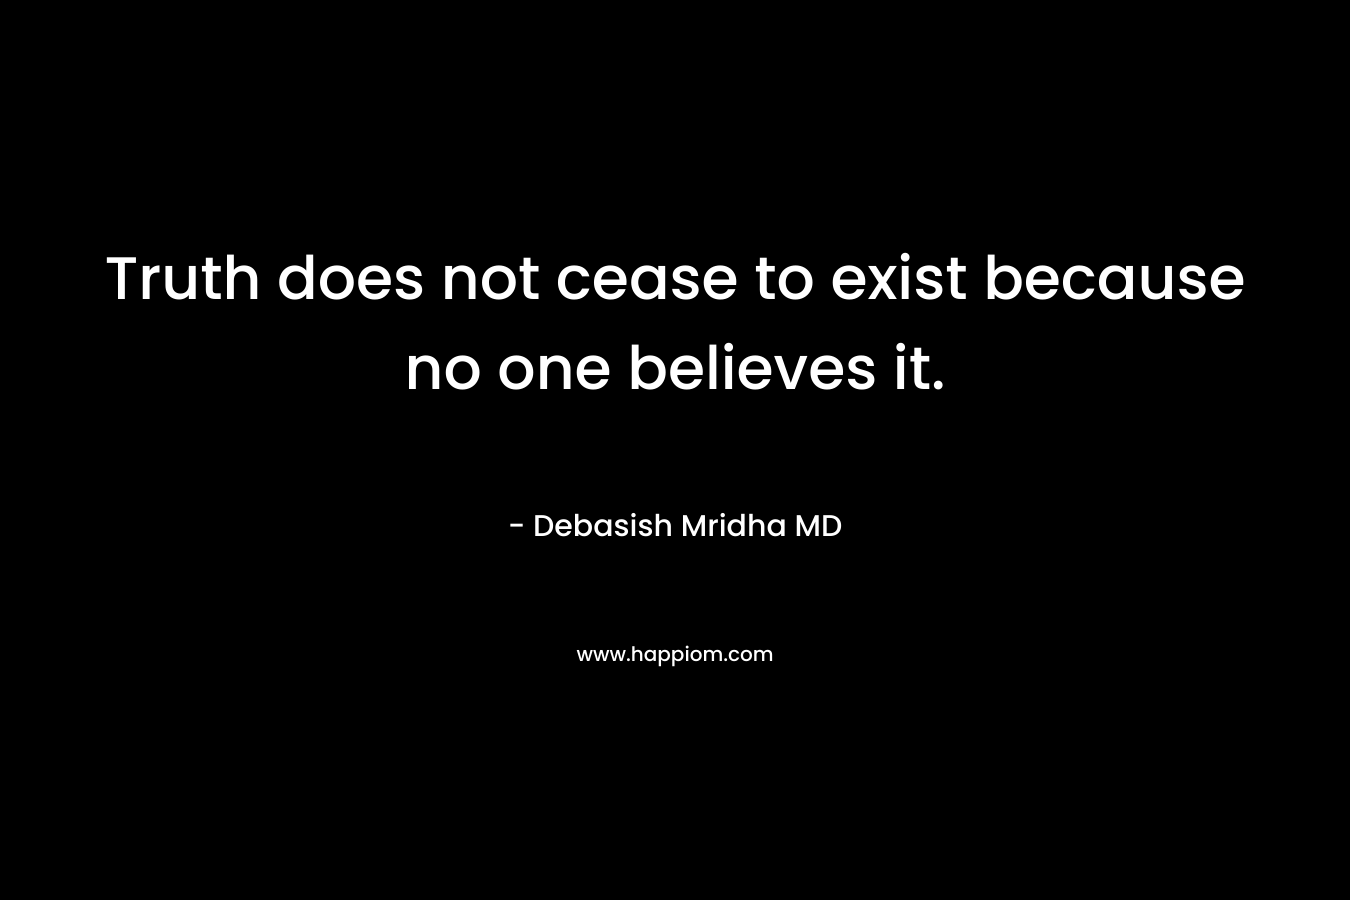 Truth does not cease to exist because no one believes it.